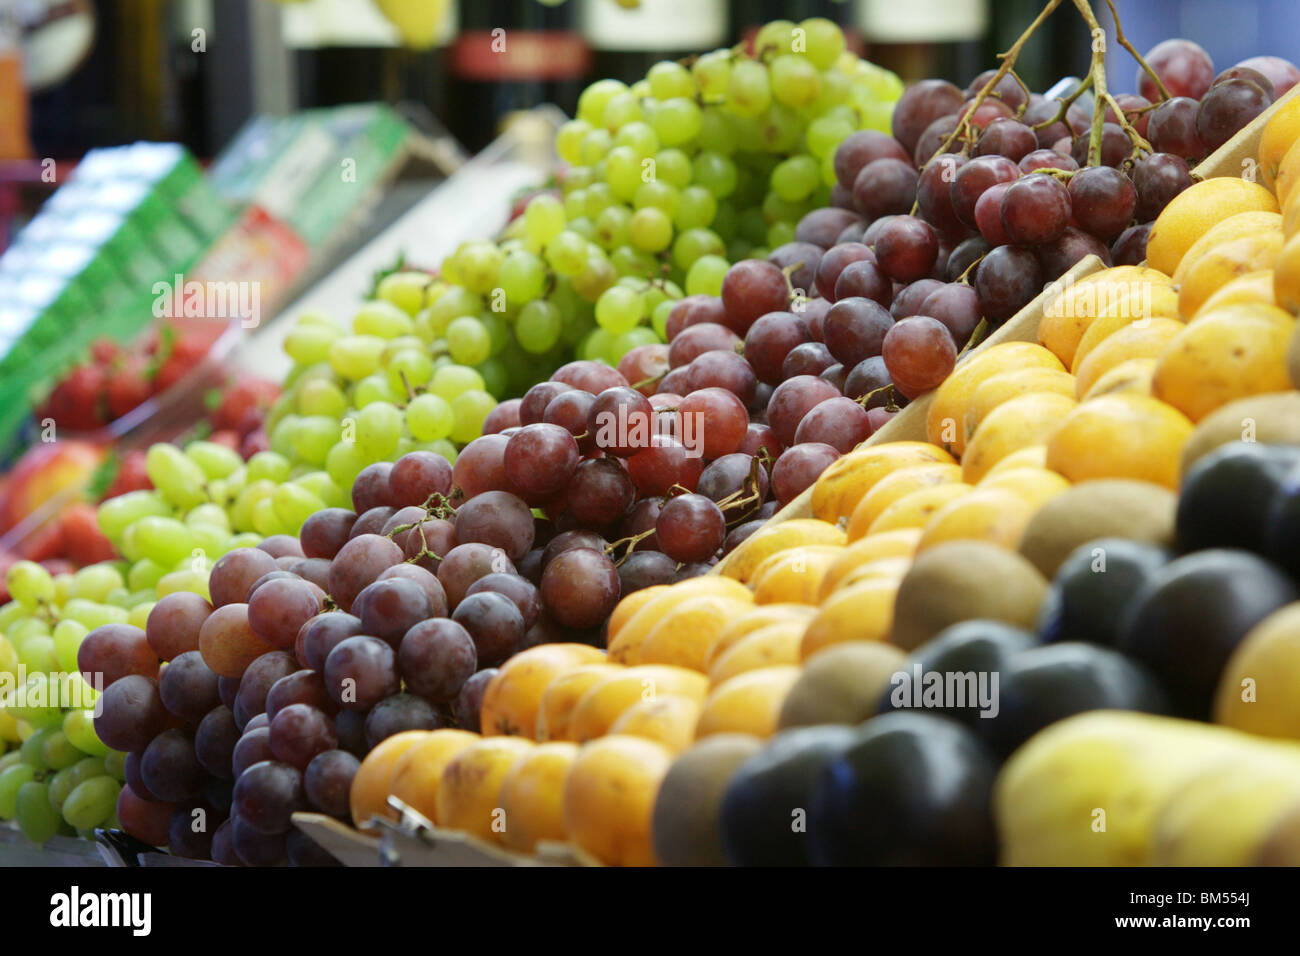 Mixed fruits in 'Greengrocer's Shop' Stock Photo